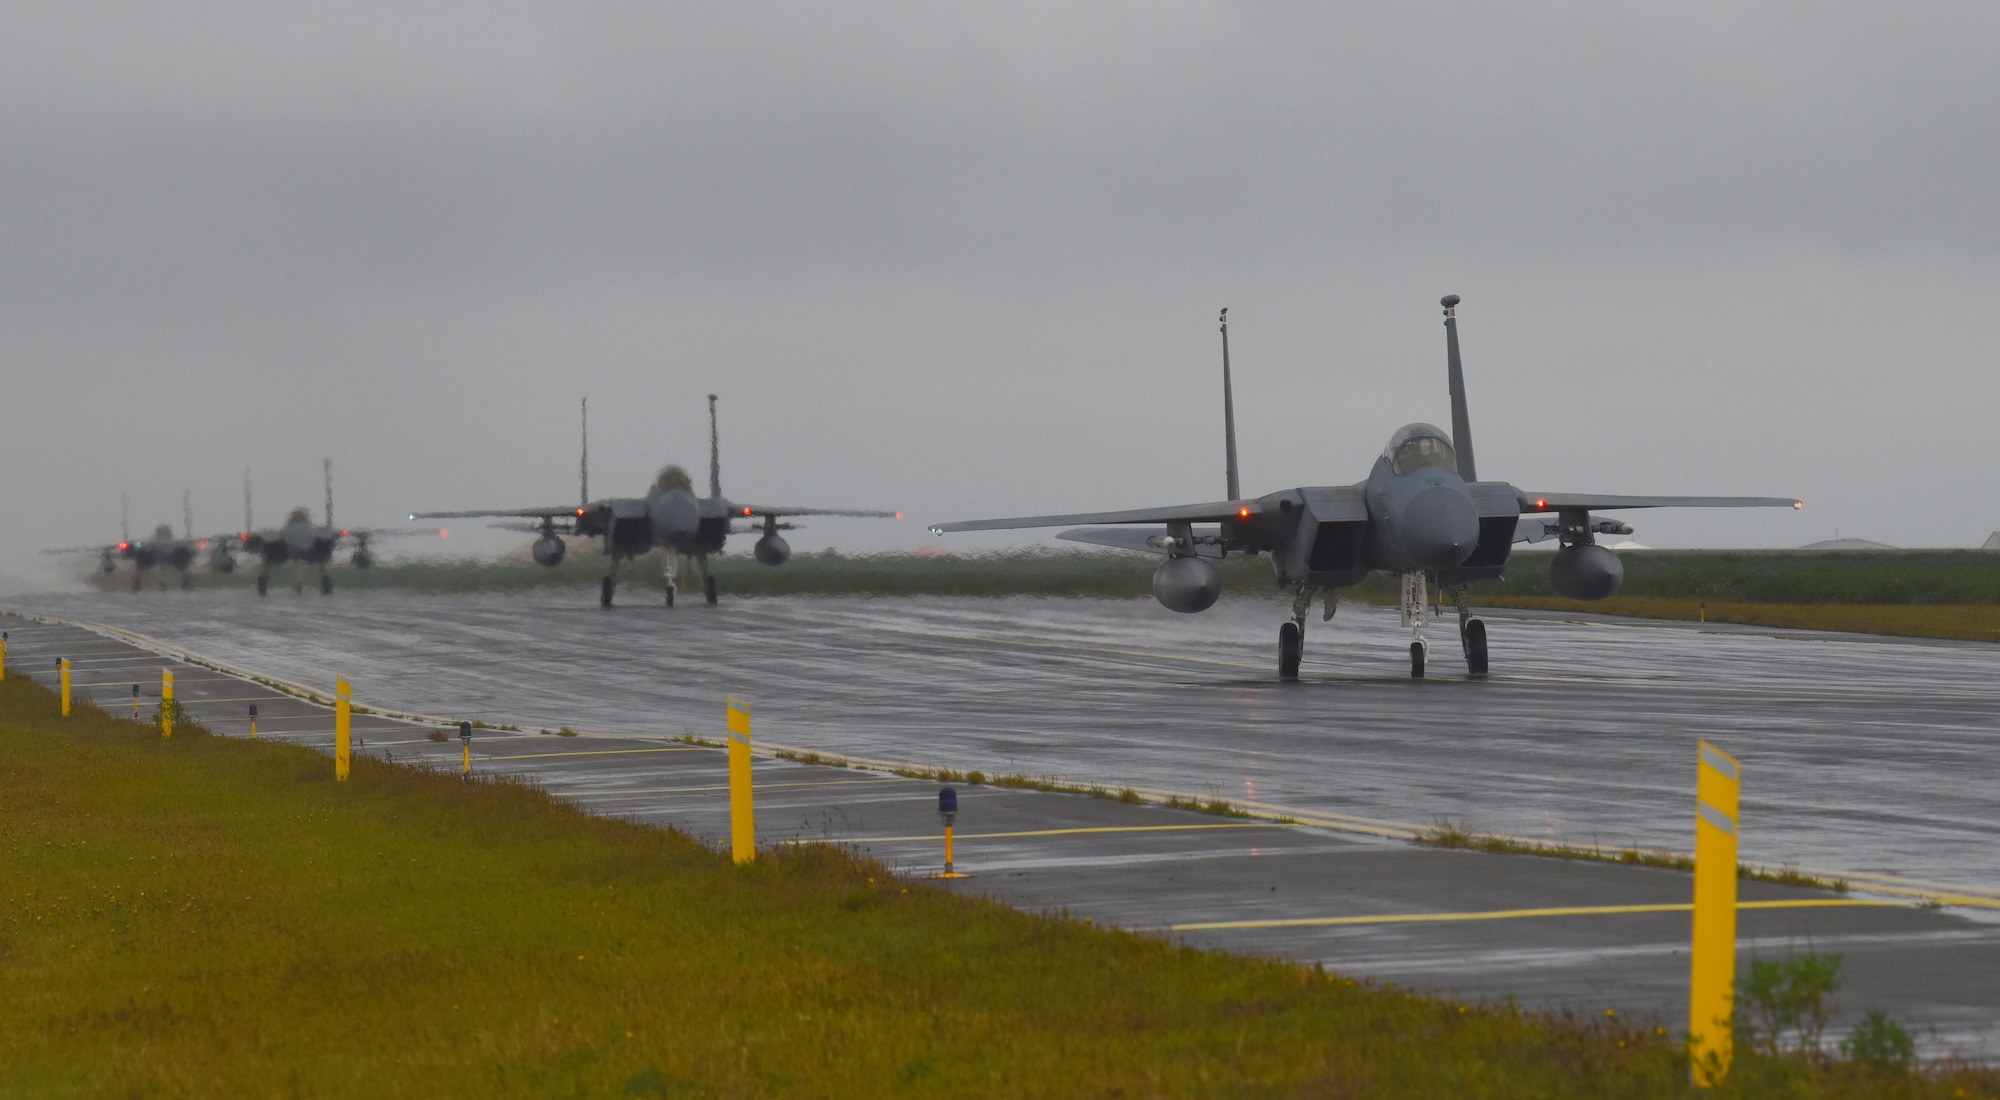 Four F-15C Eagle assigned to the 493rd Expeditionary Fighter Squadron taxi down the flightline after landing at Keflavik Air Base, Iceland, Aug. 3, 2018, in support of NATO’s Icelandic Air Surveillance mission. More than 250 U.S. Air Forces in Europe-Air Forces Africa Airmen and 14 F-15C/D Eagles deployed from Royal Air Force Lakenheath, England, with additional support from U.S. Airmen assigned to Aviano Air Base, Italy, Royal Air Force Mildenhall, England, and Ramstein Air Base, Germany. (U.S. Air Force photo/Staff Sgt. Alex Fox Echols III)